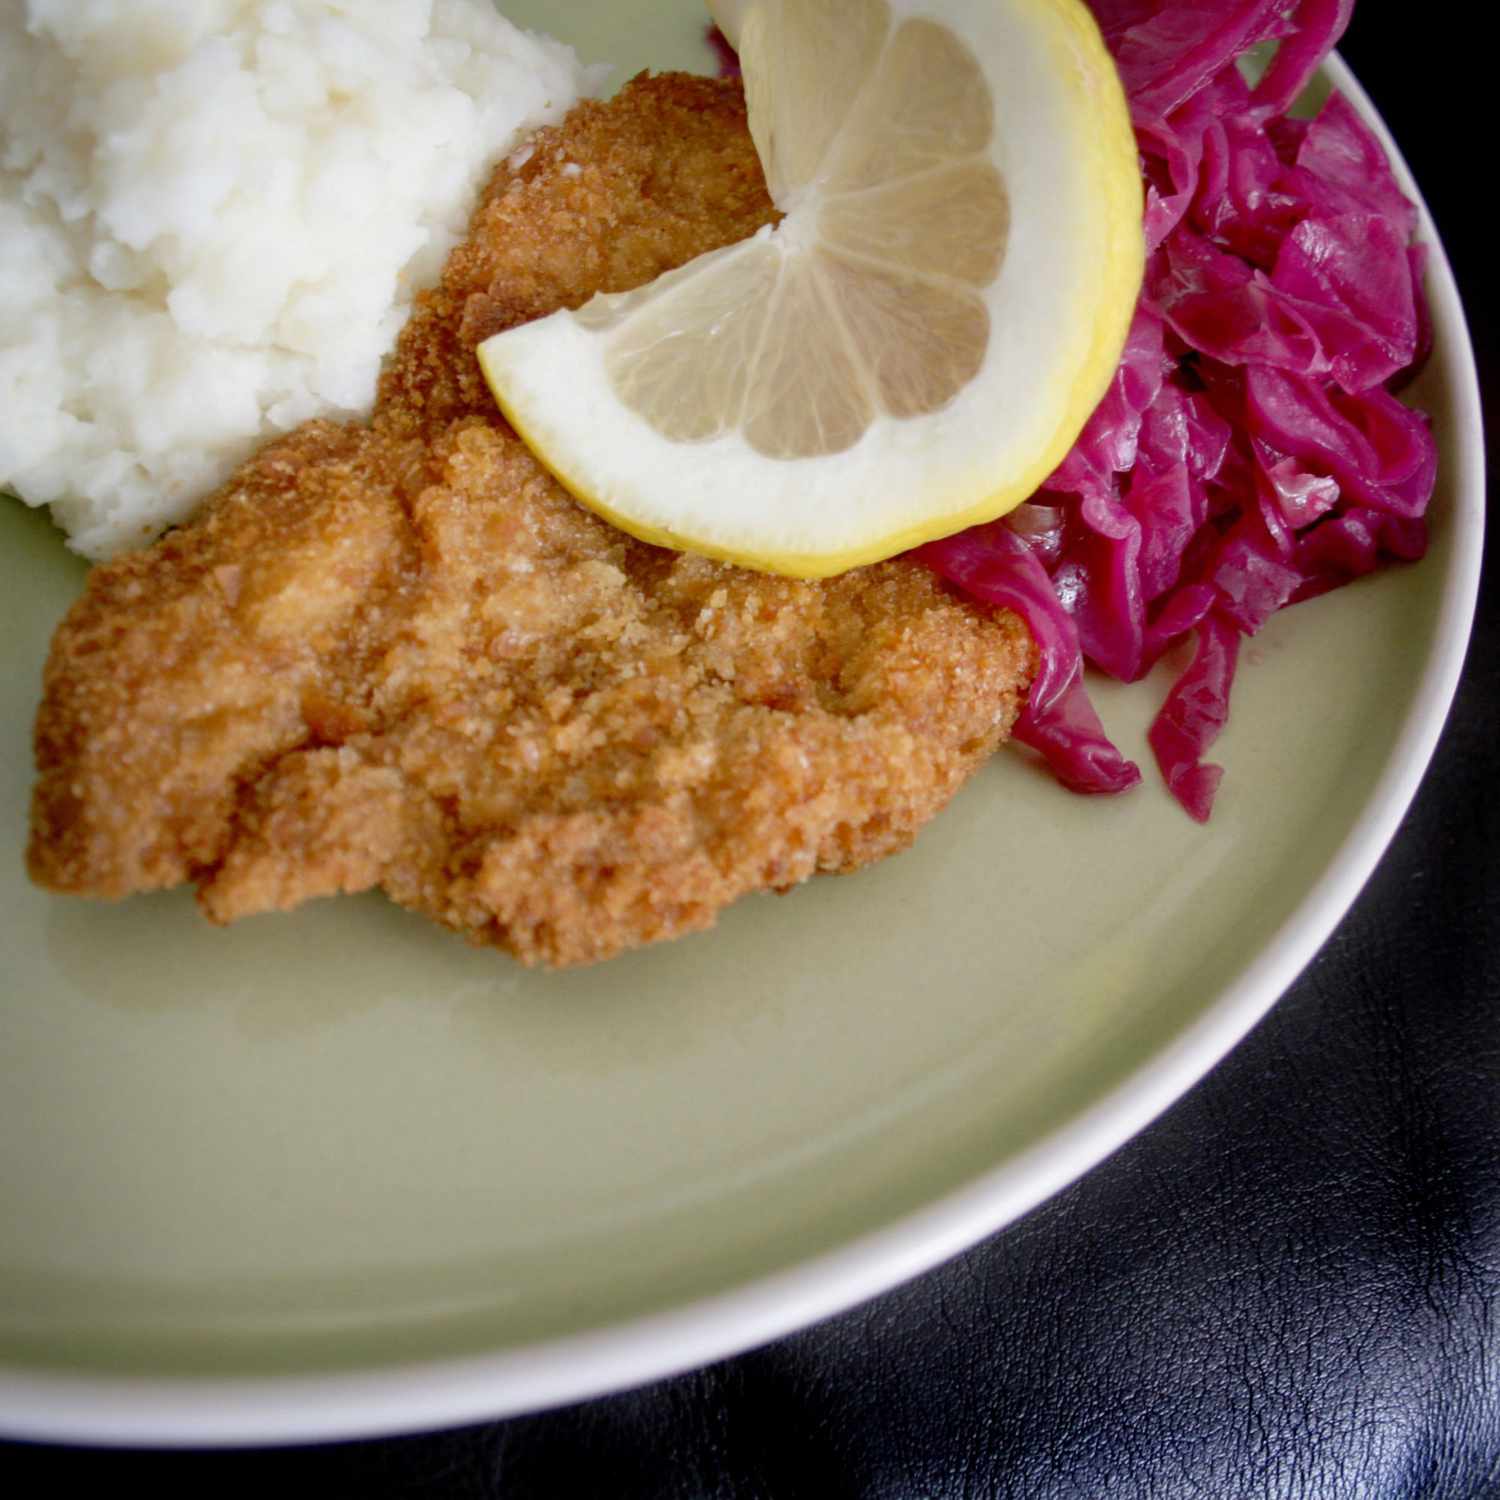 a dinner plate with a fried breaded veal cutlet garnished with a lemon slice, with red cabbage and mashed potatoes in the background